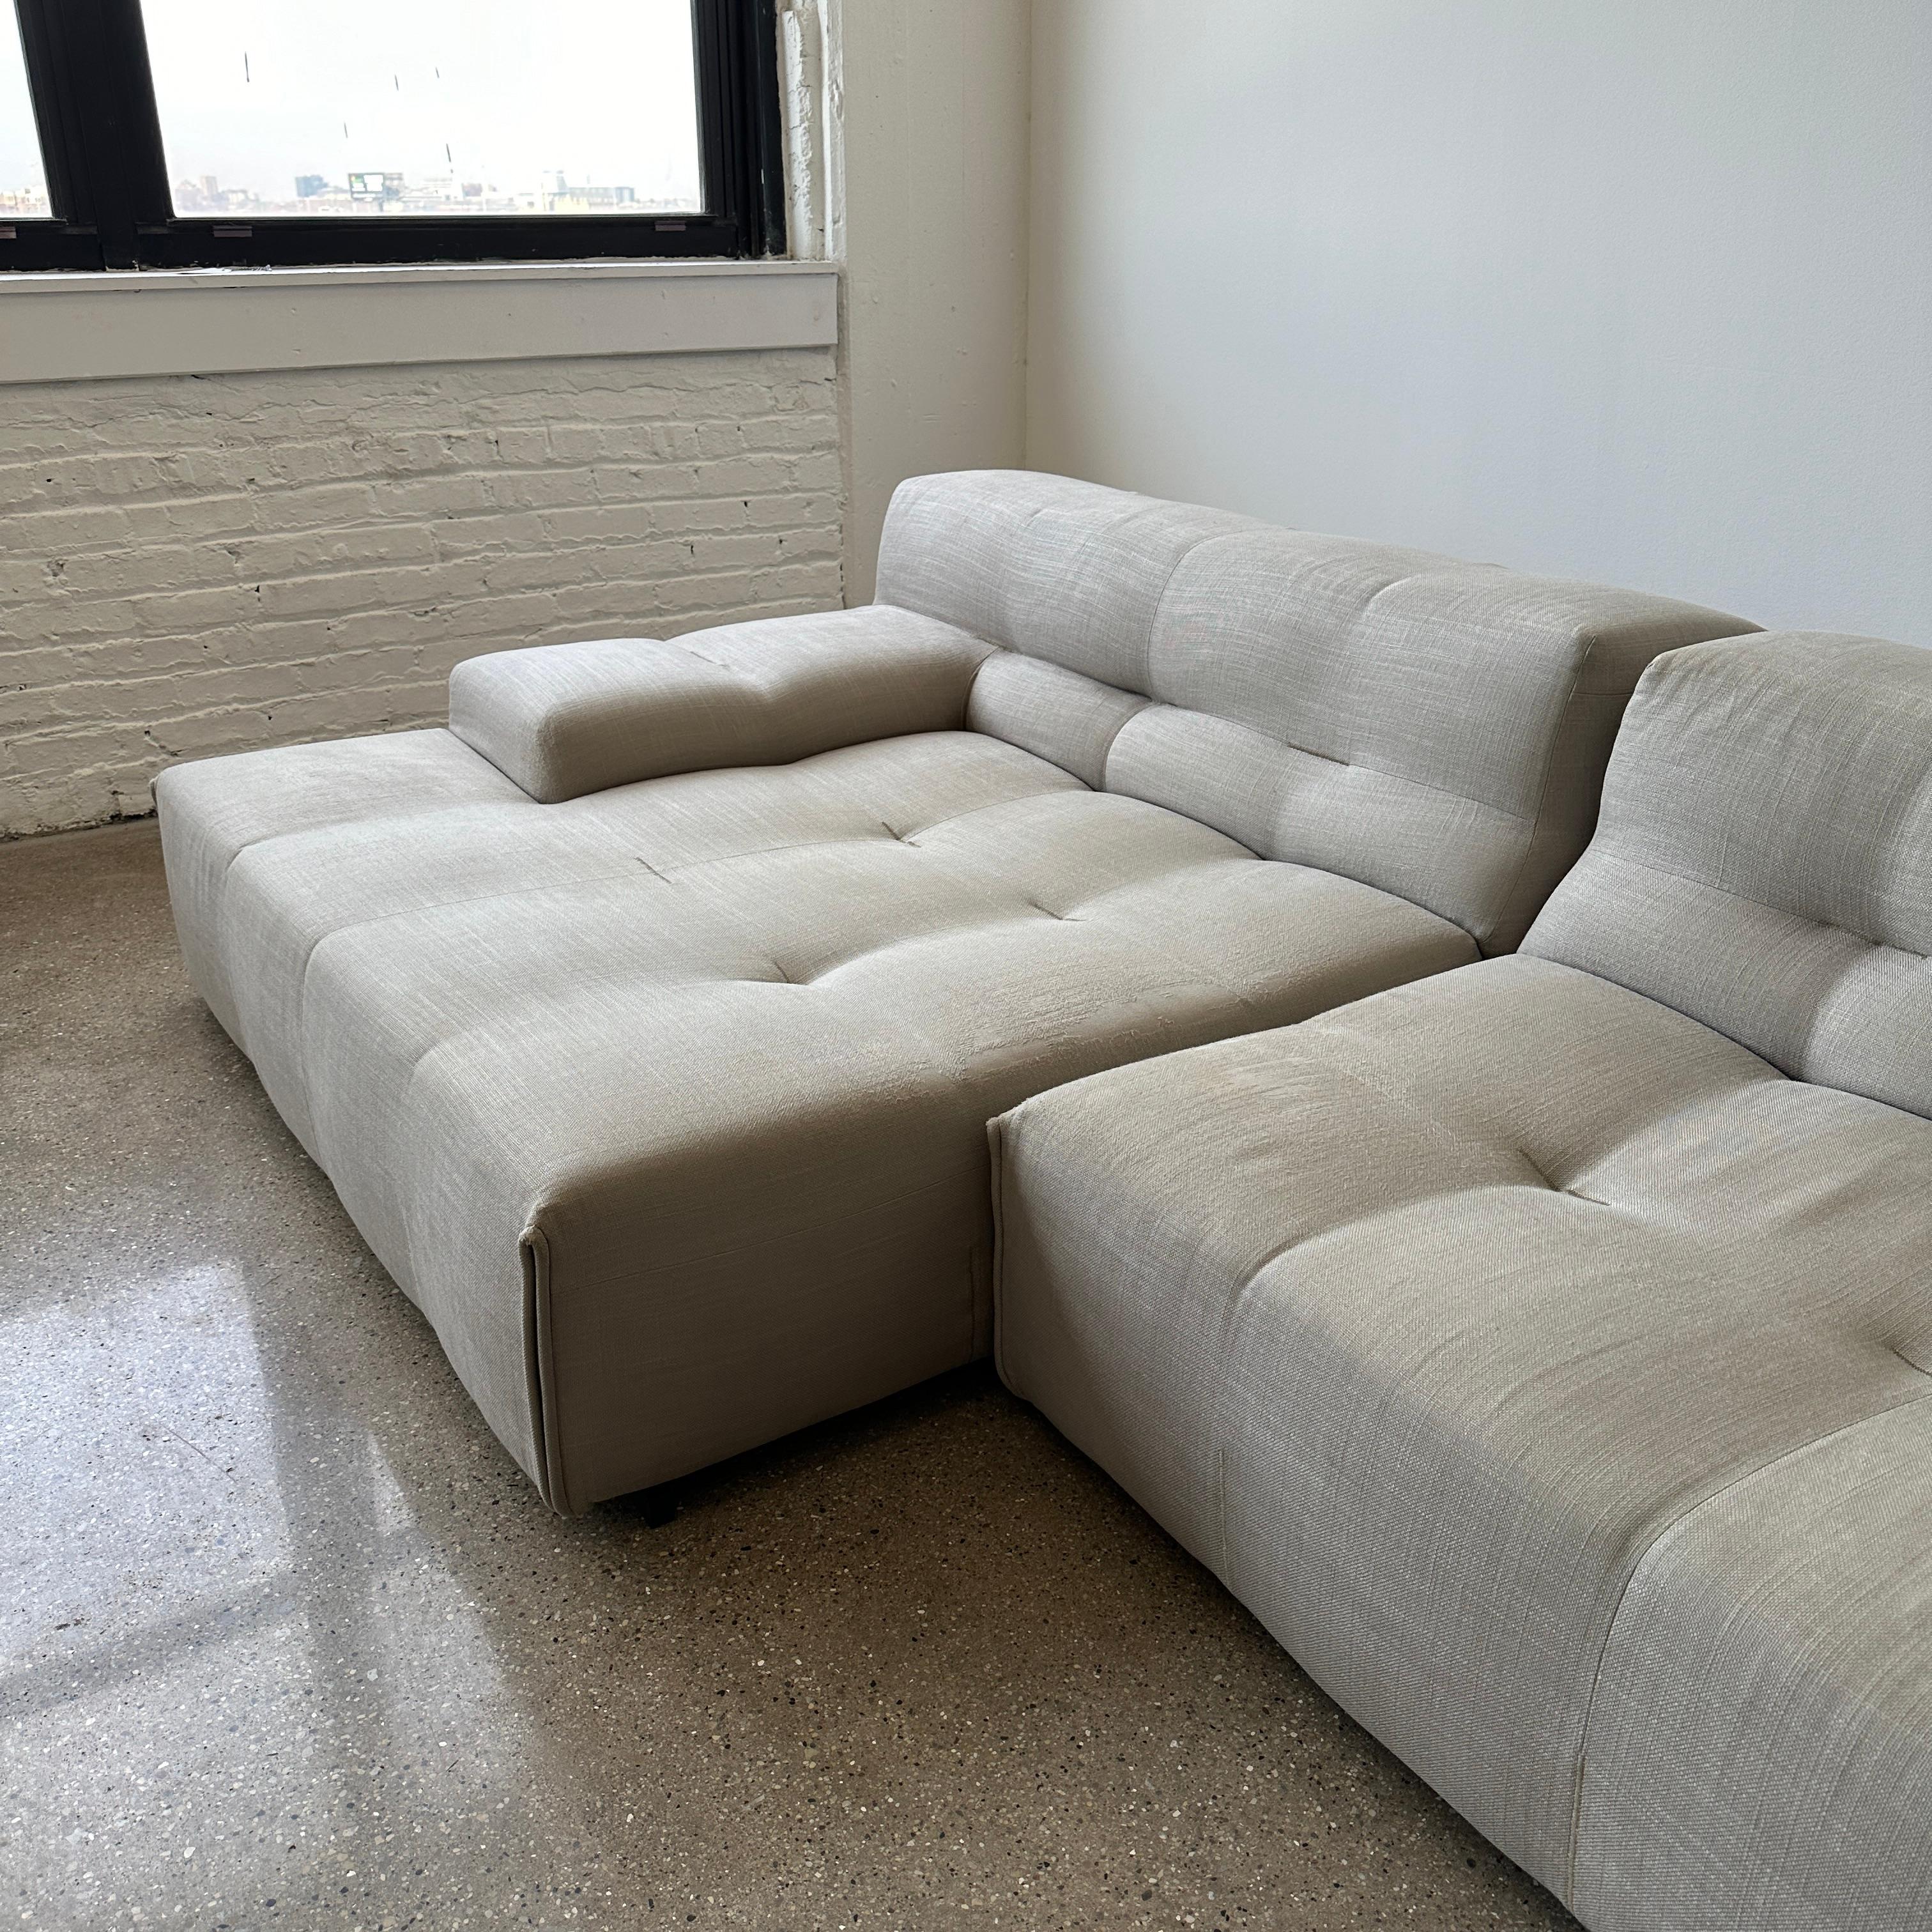 By Patricia Urquiola c. mid 2000s. There is some significant wear on the fabric so this piece is priced accordingly. However, it reads wonderfully and is incredibly comfortable. The original legs also no longer hold the sofa together so we’ve used